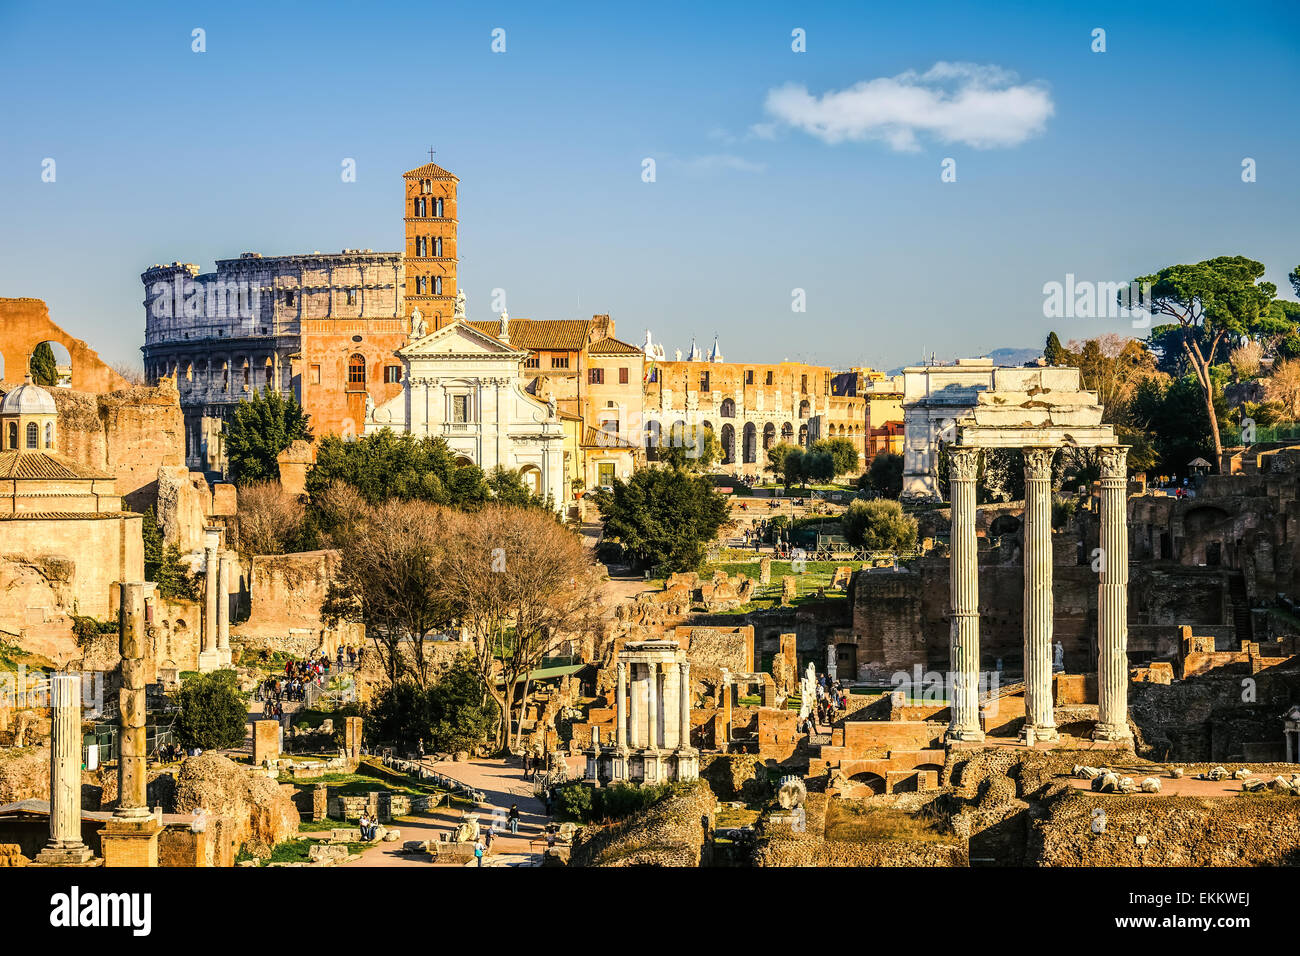 Forum and Coliseum in Rome Stock Photo